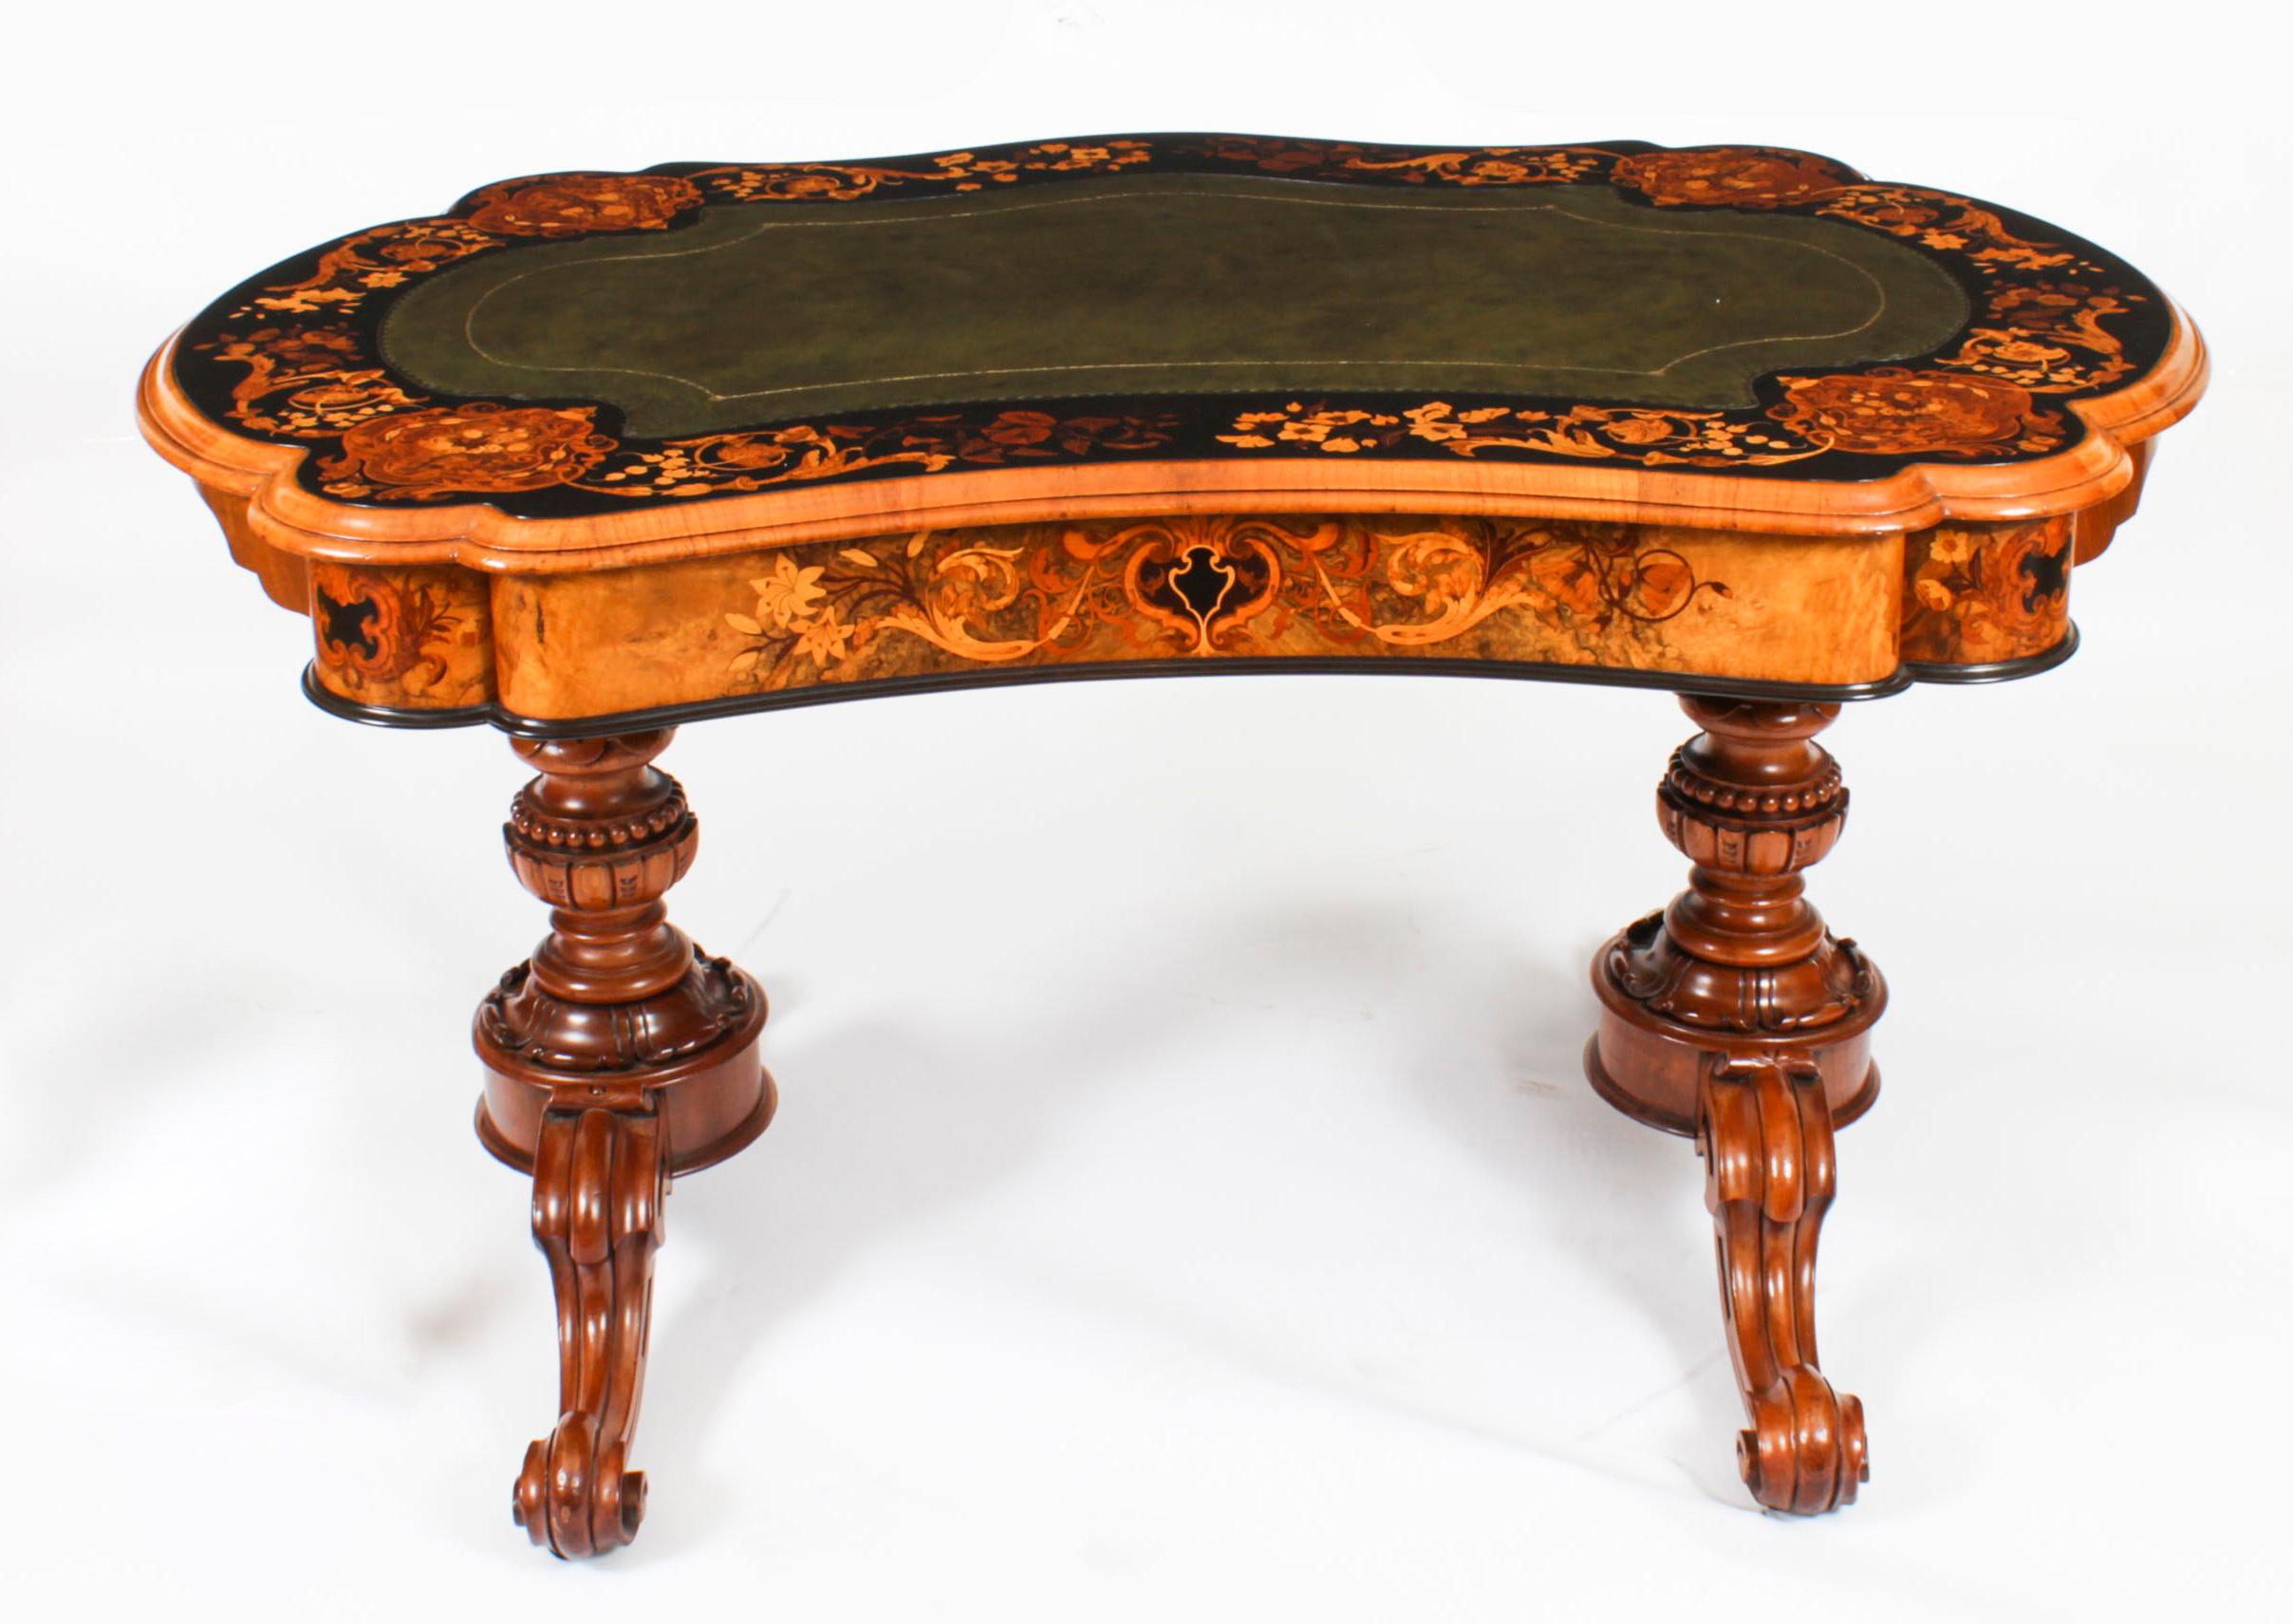 A beautiful antique William IV burr walnut, ebony, ebonized and marquetry kidney shaped writing table, circa 1835 in date.
 
The shaped top features an inset gilt tooled green leather writing surface within an ebonized border with floral marquetry